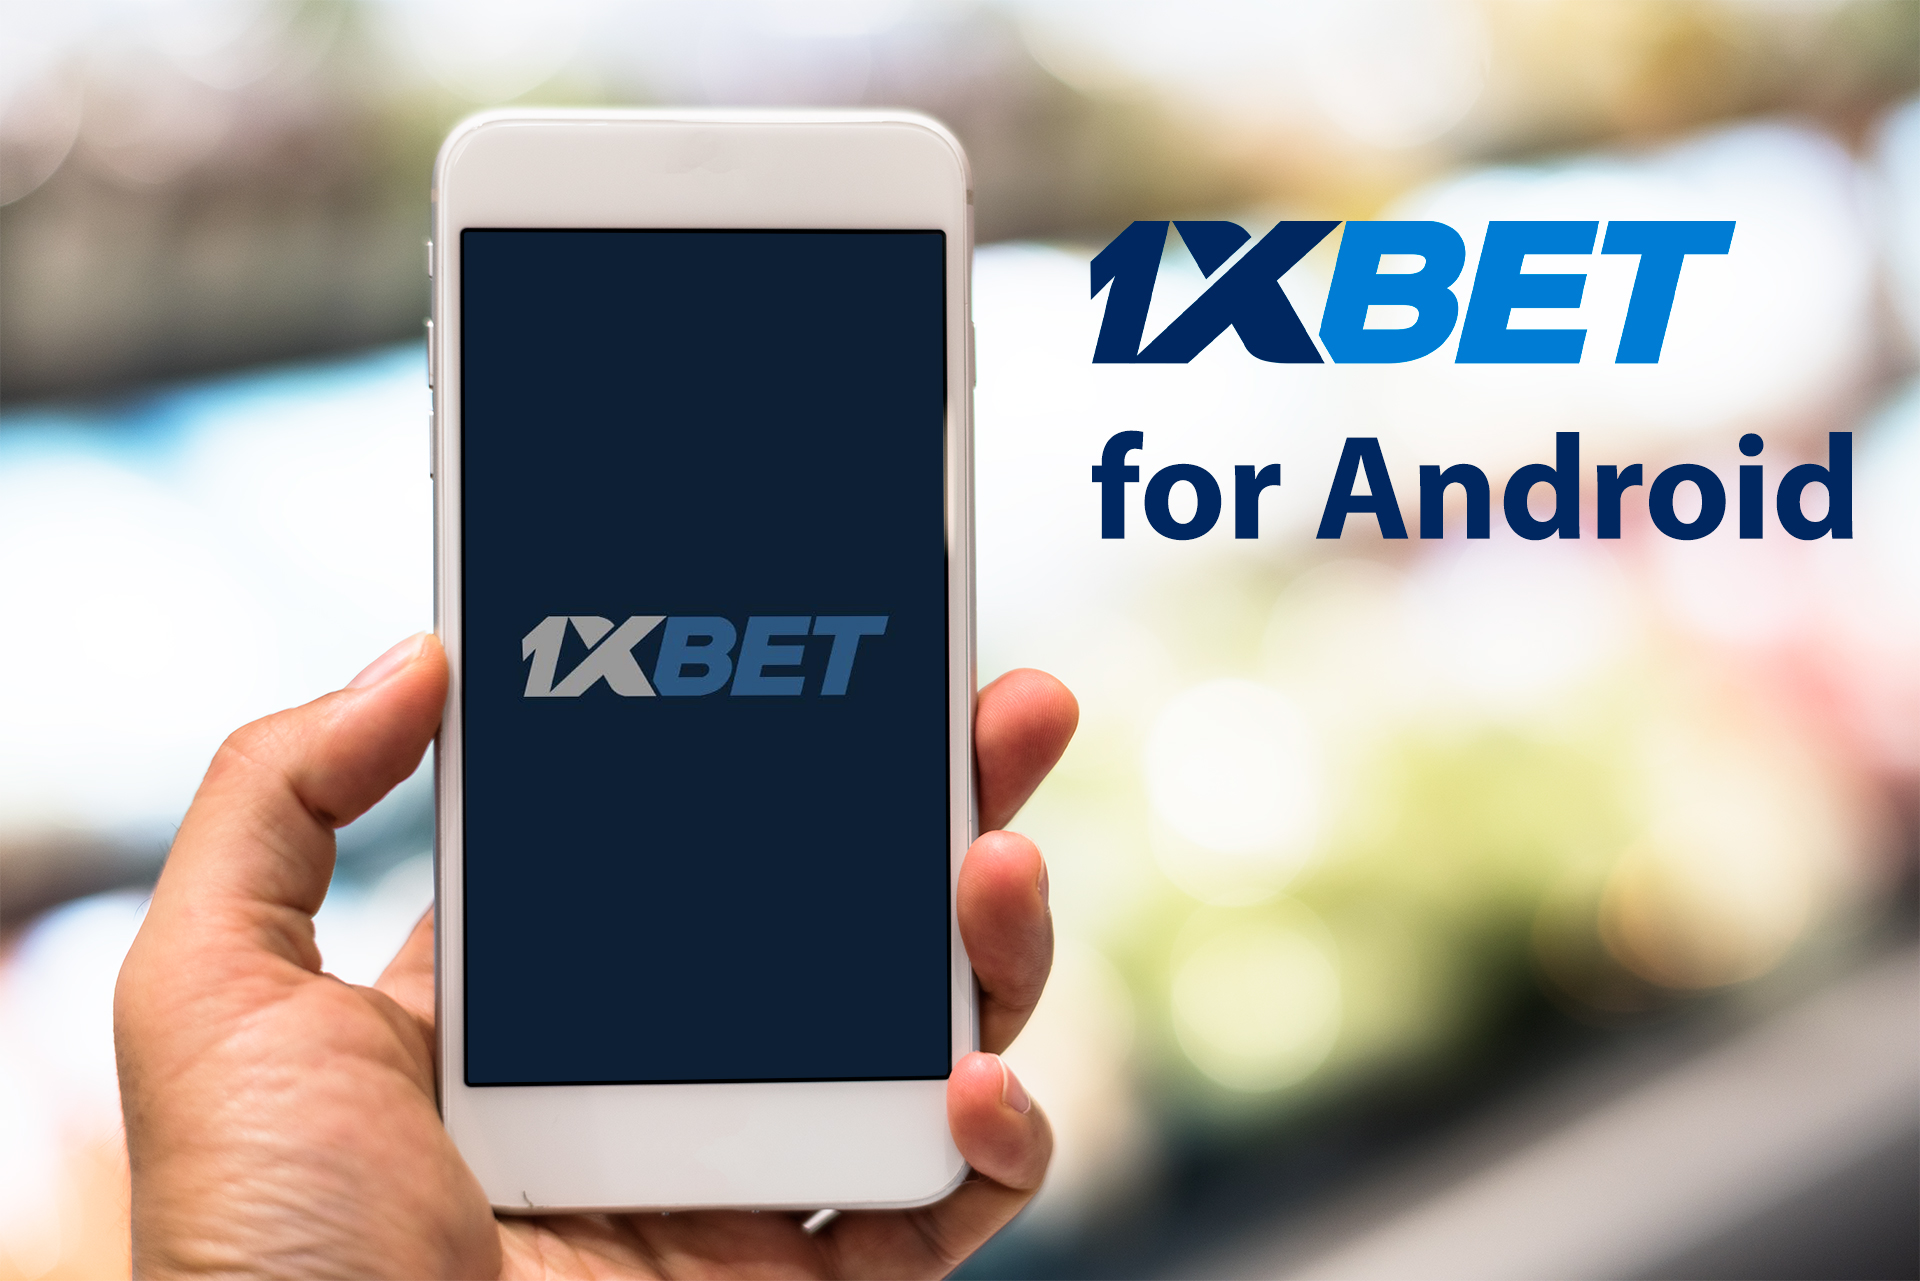 You can easily install the 1xbet app on your Android device.